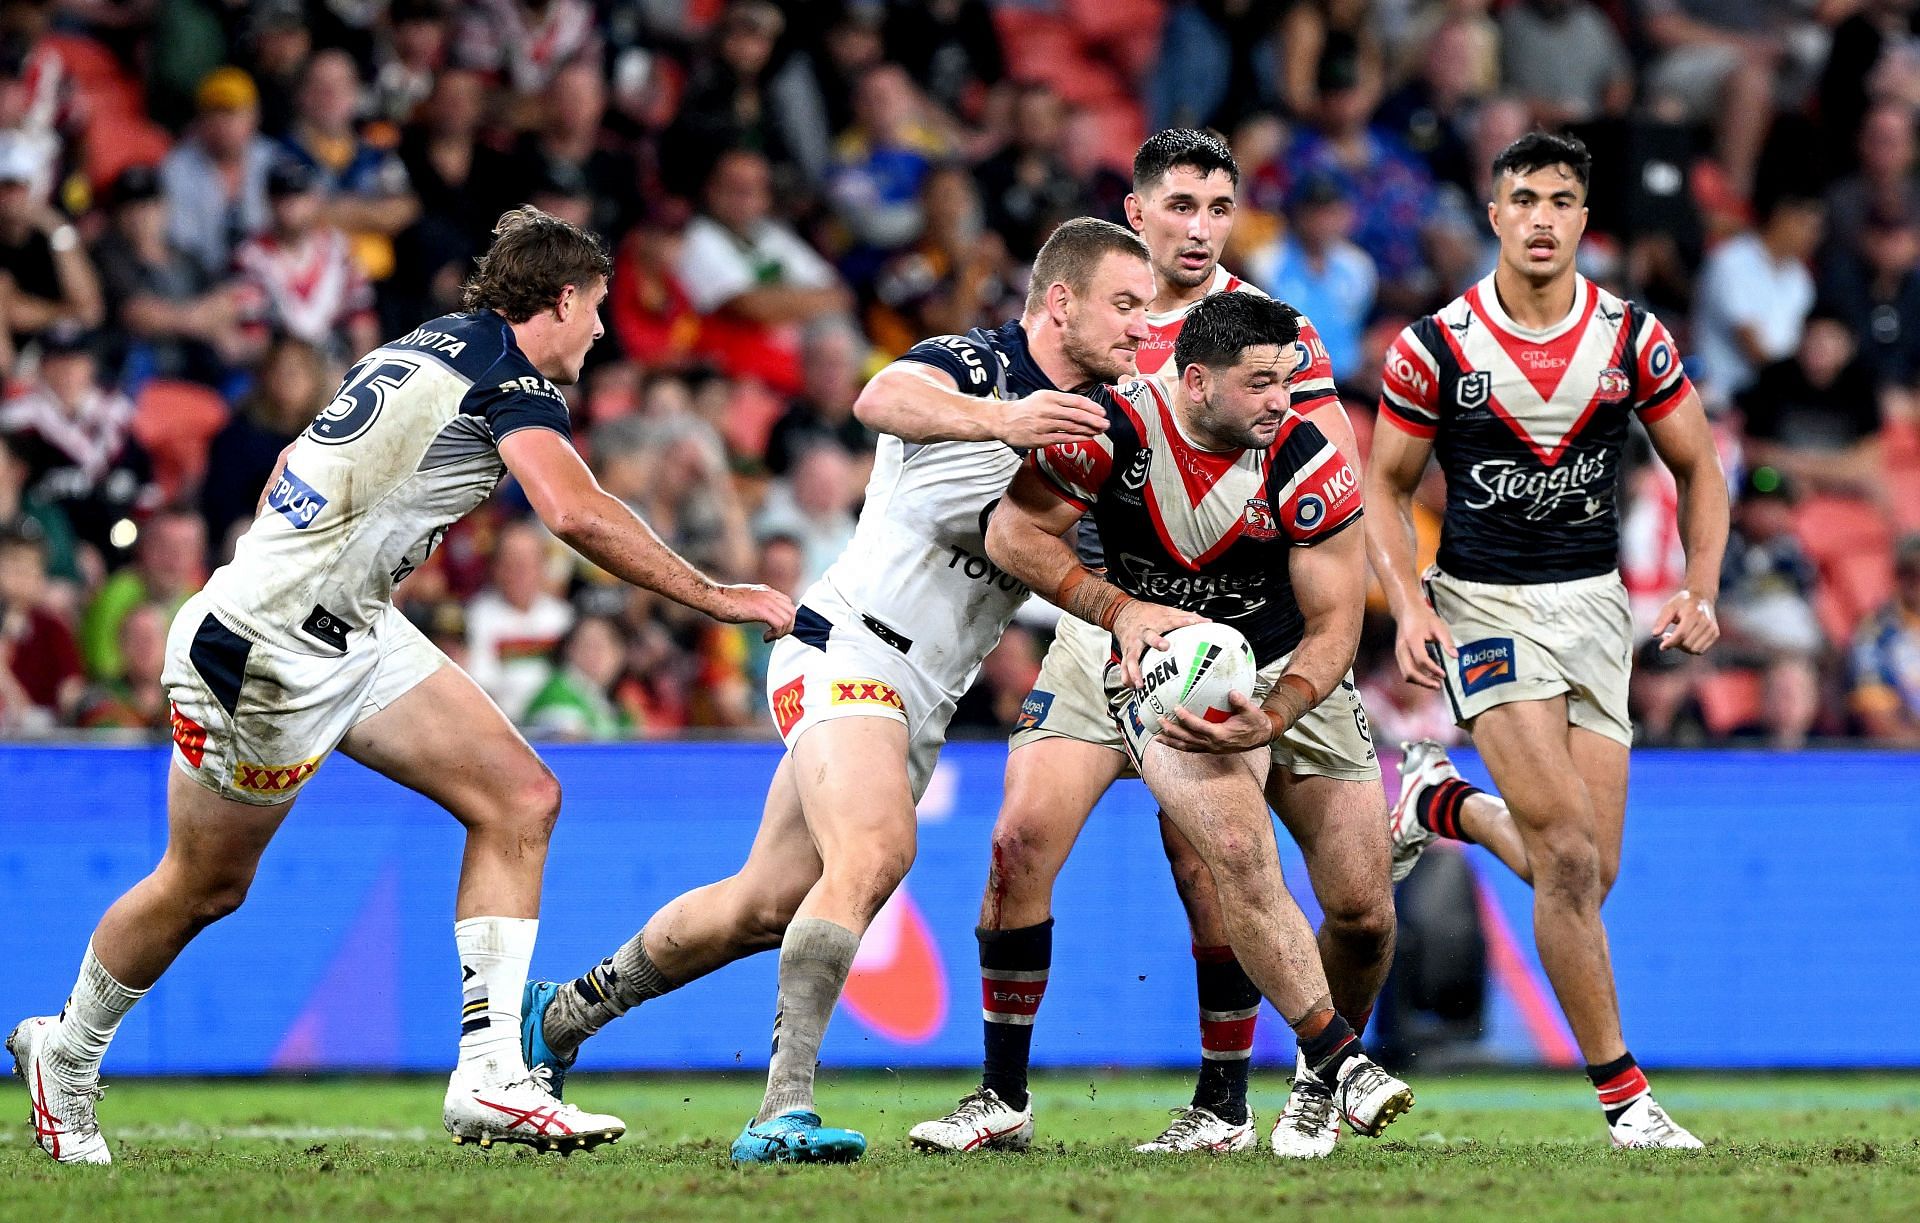 NRL Rd 10 - Roosters v Cowboys